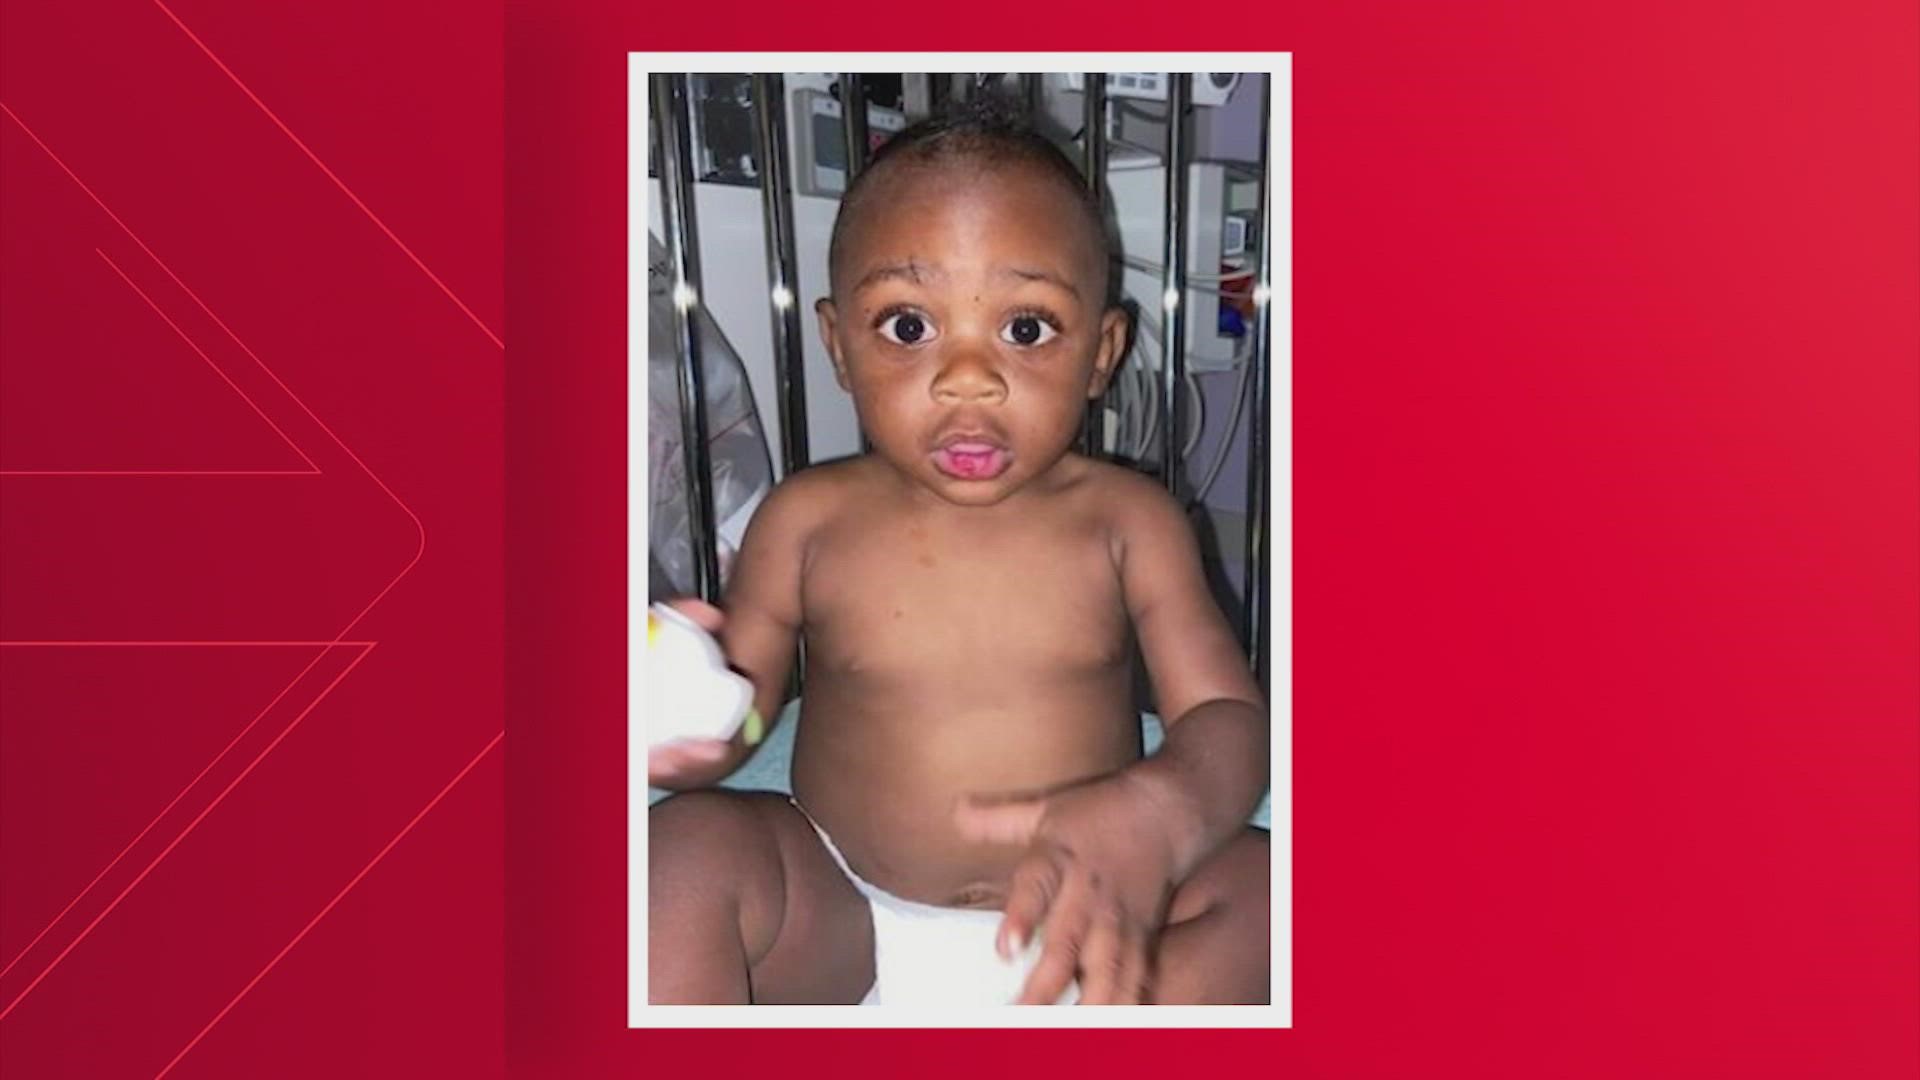 A baby was found alone in a southwest Houston apartment. Police need help identifying the child and his guardian.